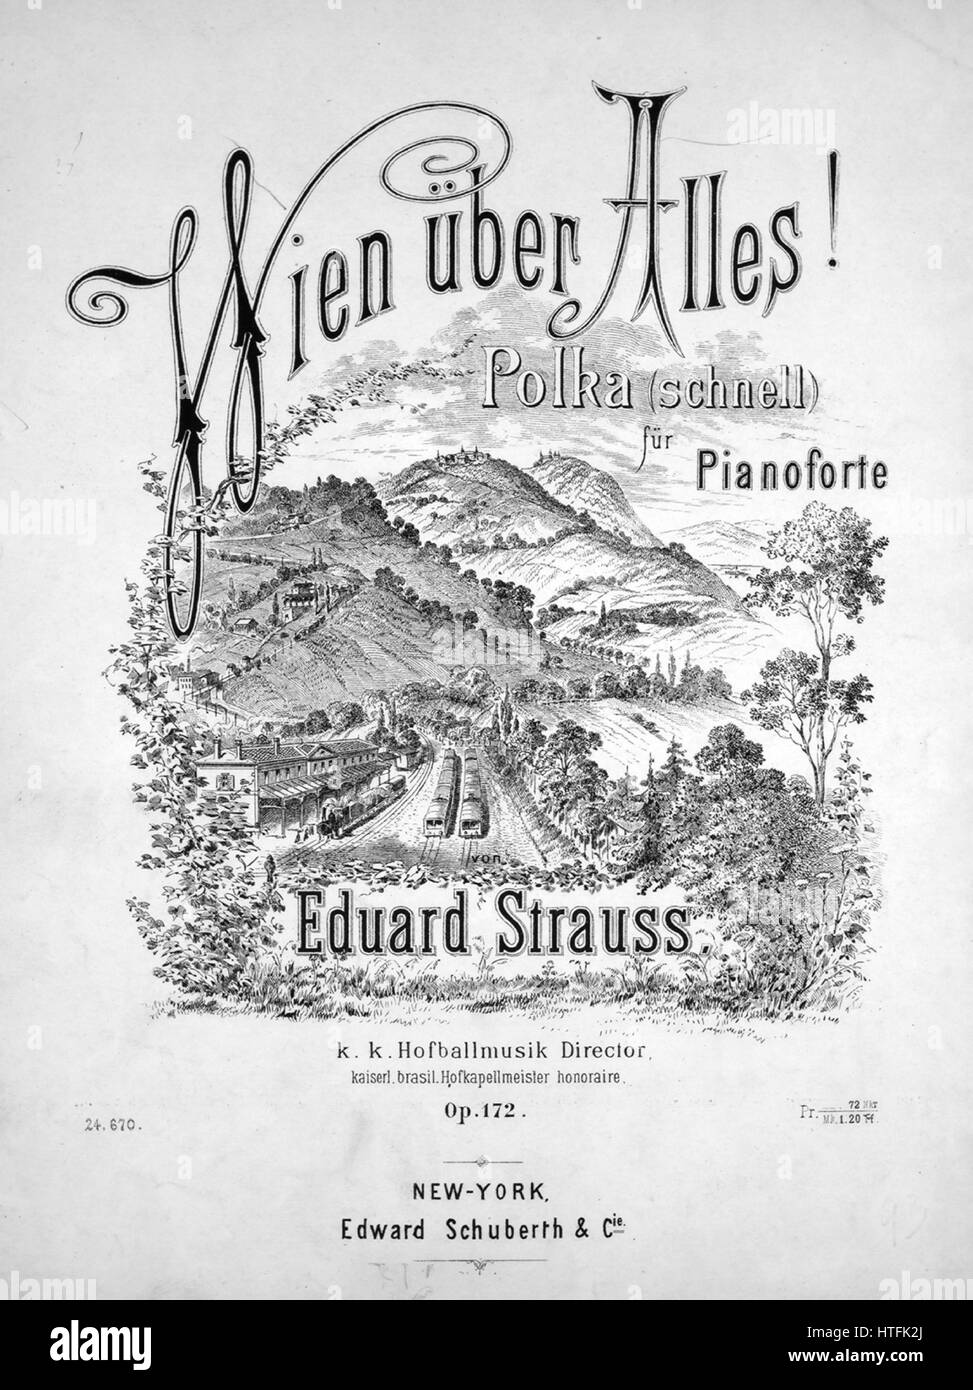 Sheet music cover image of the song 'Wien Uber Alles! Polka (schnell) fur Pianoforte', with original authorship notes reading 'Von Eduard Strauss, kk Hofballmusik Director, kaiserl brasilHofkapellmeister honoraire', United States, 1900. The publisher is listed as 'Edward Schuberth and Cie.', the form of composition is 'sectional', the instrumentation is 'piano', the first line reads 'None', and the illustration artist is listed as 'Lit. art. Anst. v. Jos. Eberle and Co., VII Westbahnstr. 9 Wien'. Stock Photo